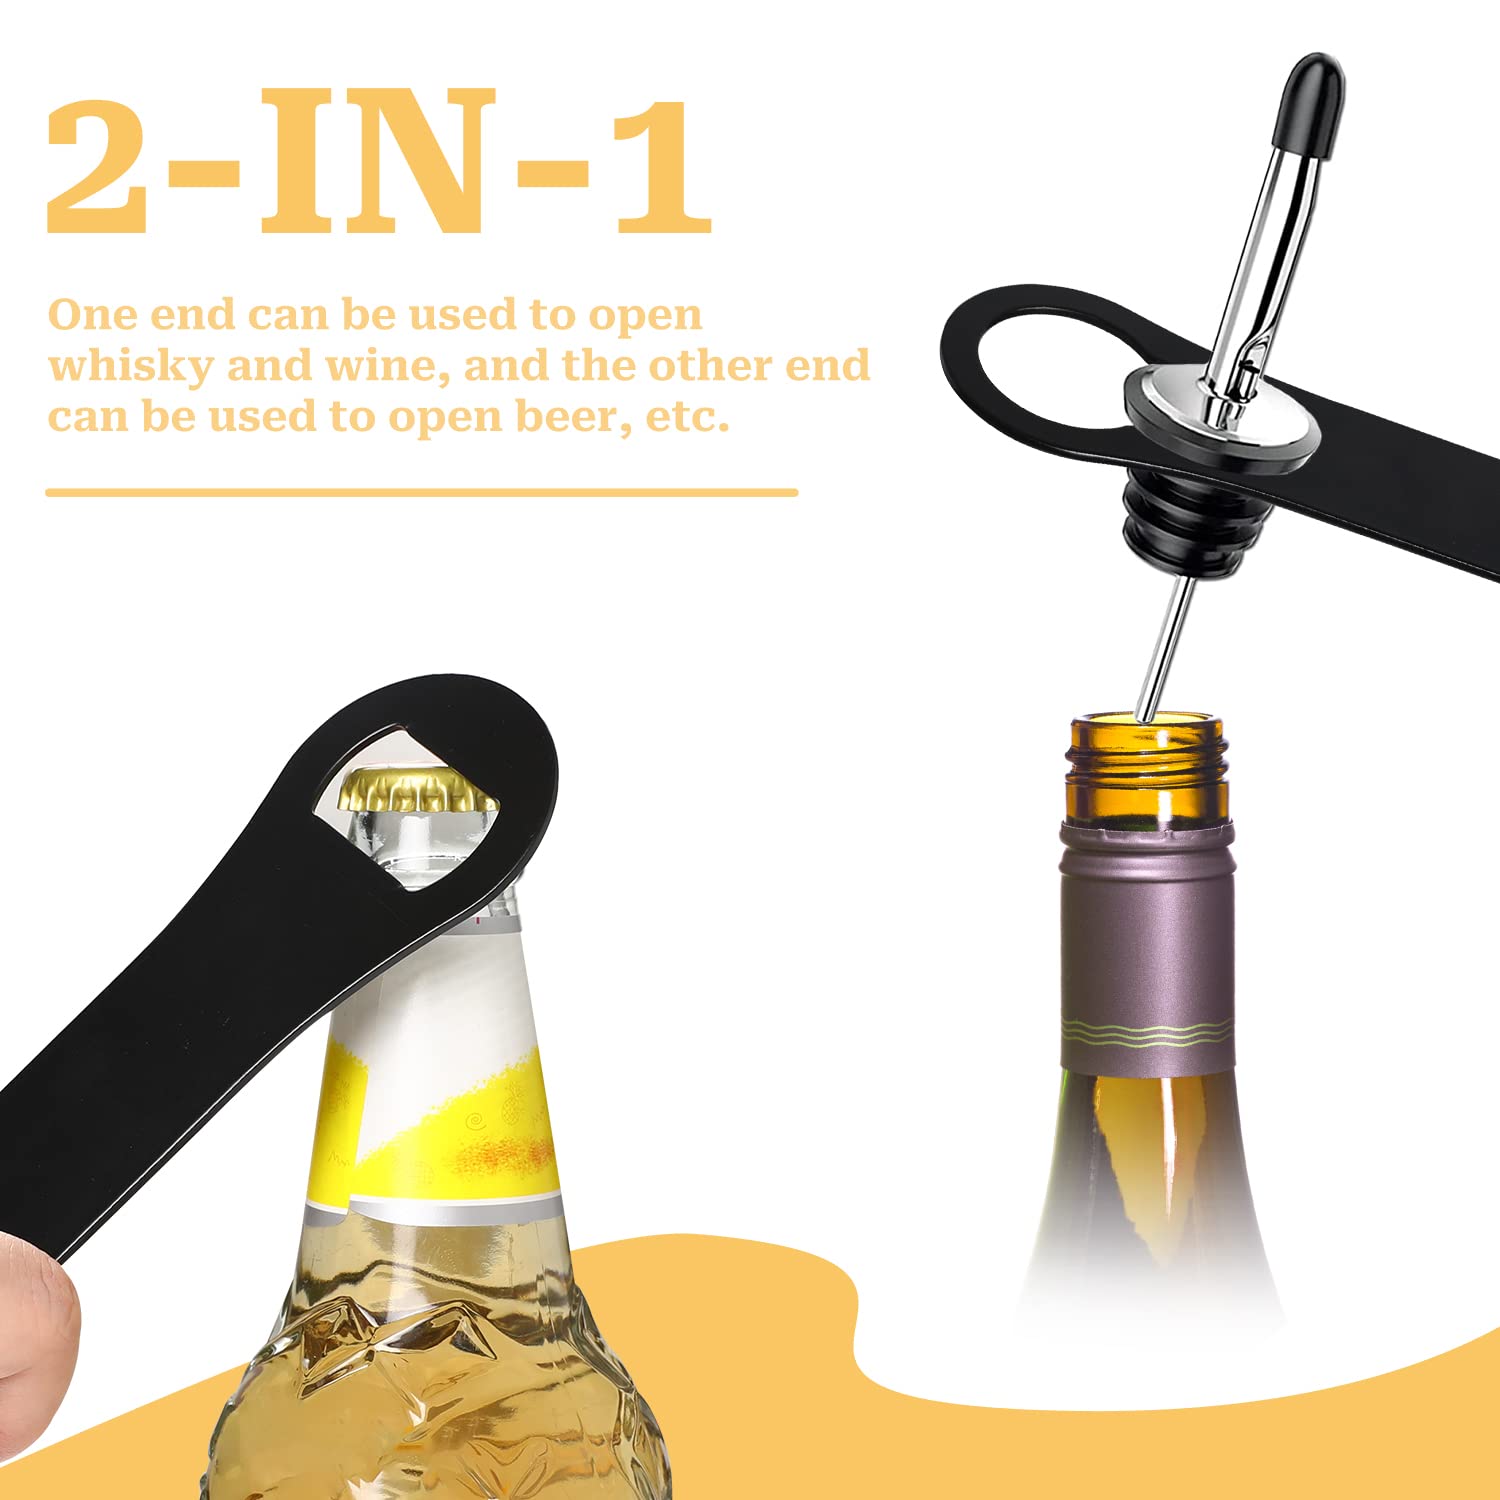 2 Pieces Bottle Opener and Pour Spout Remover Flat Bar Key for Bartenders Stainless Steel Speed Opener Multifunction Dog Bone Wine Bottle Opener for Home Kitchen Party and Bar